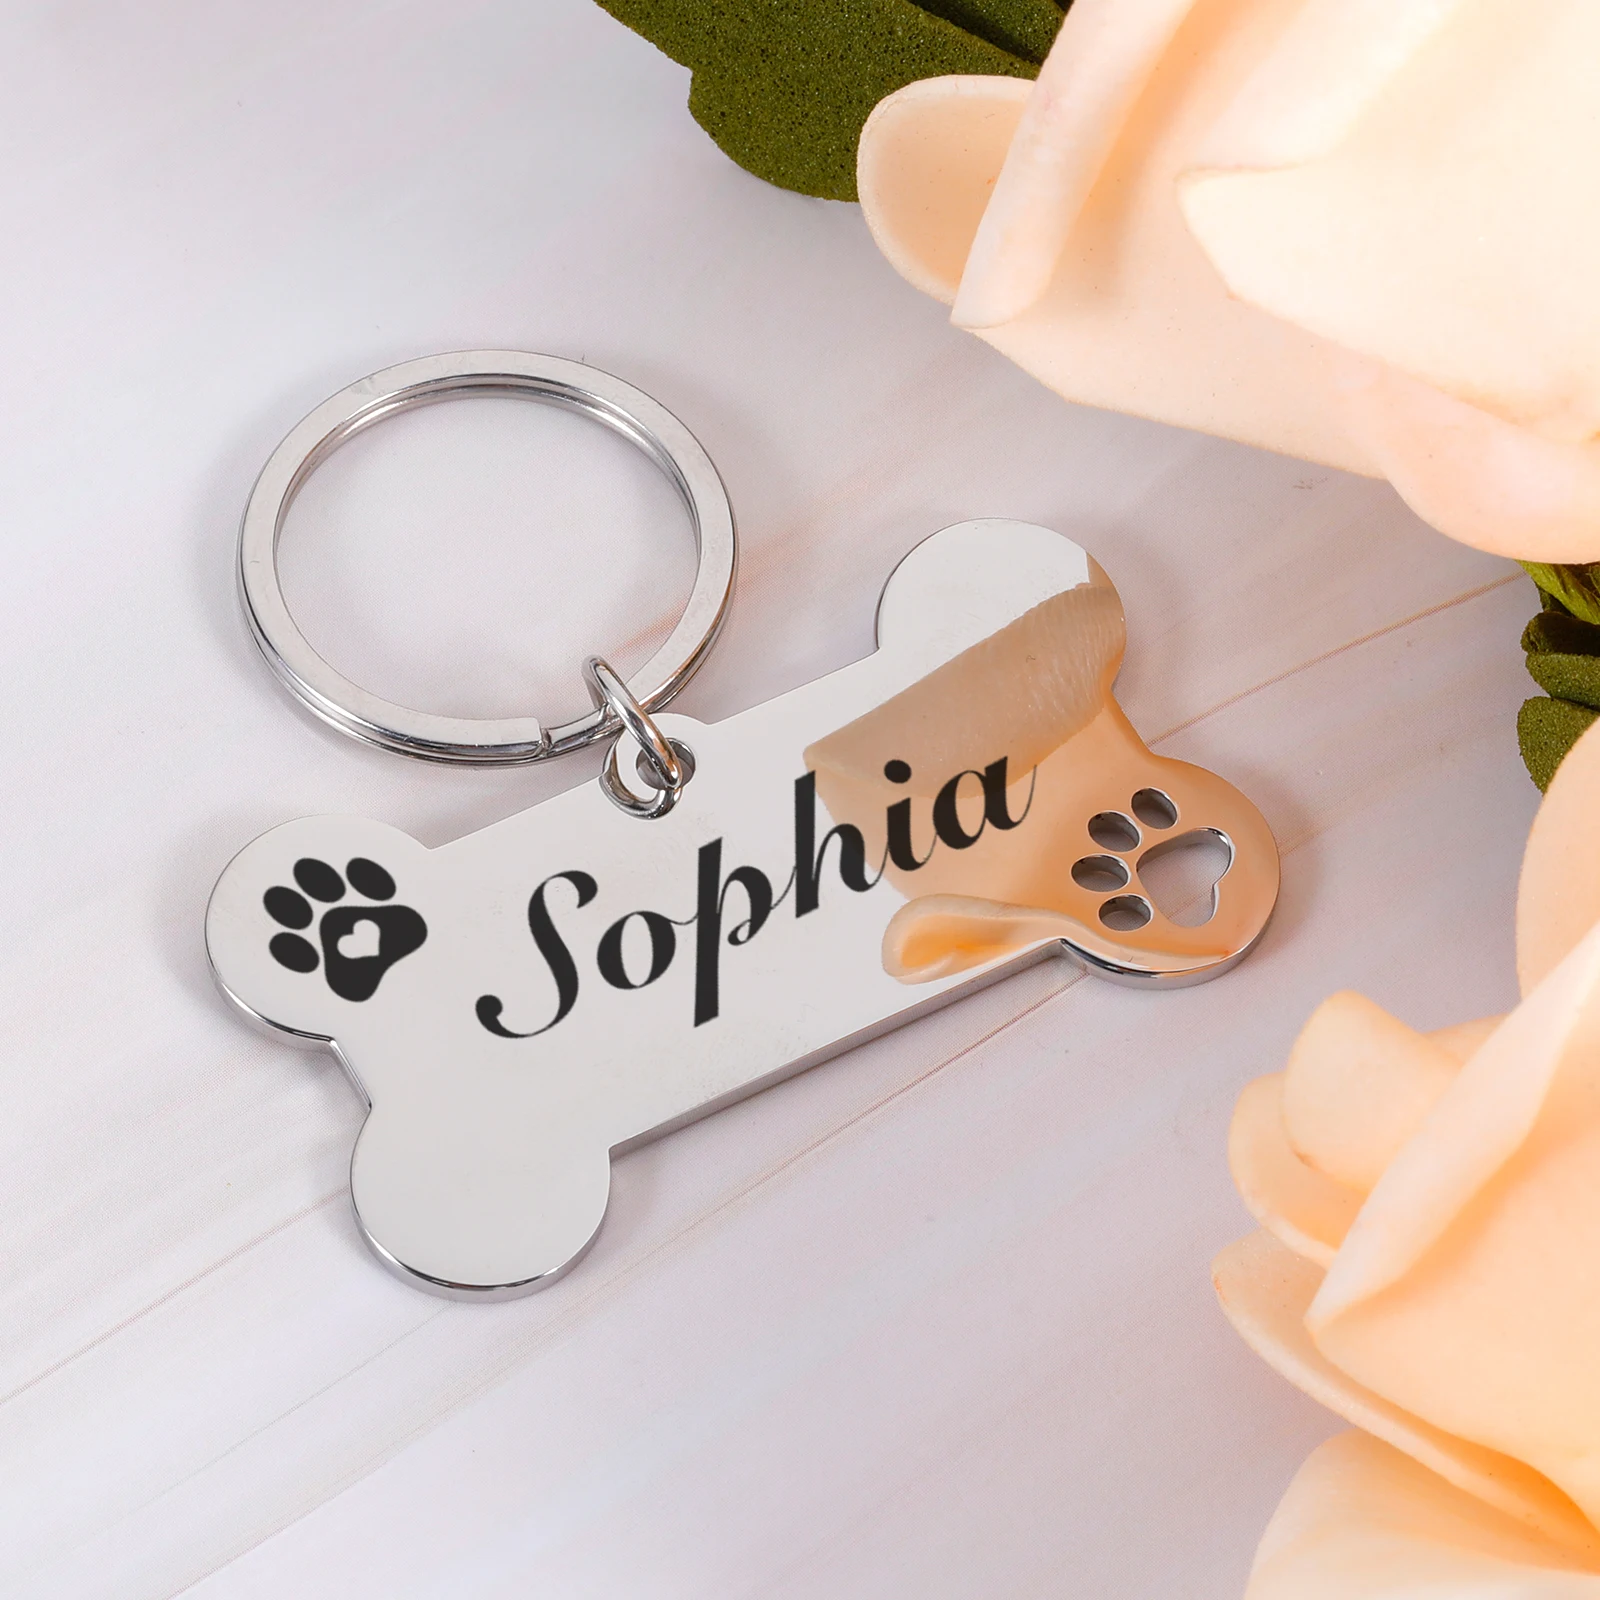 Personalized-Pet-ID-Tag-Keychain-Engraved-Pet-ID-Name-for-Cat-Puppy-Dog-Collar-Tag-Pendant.jpg